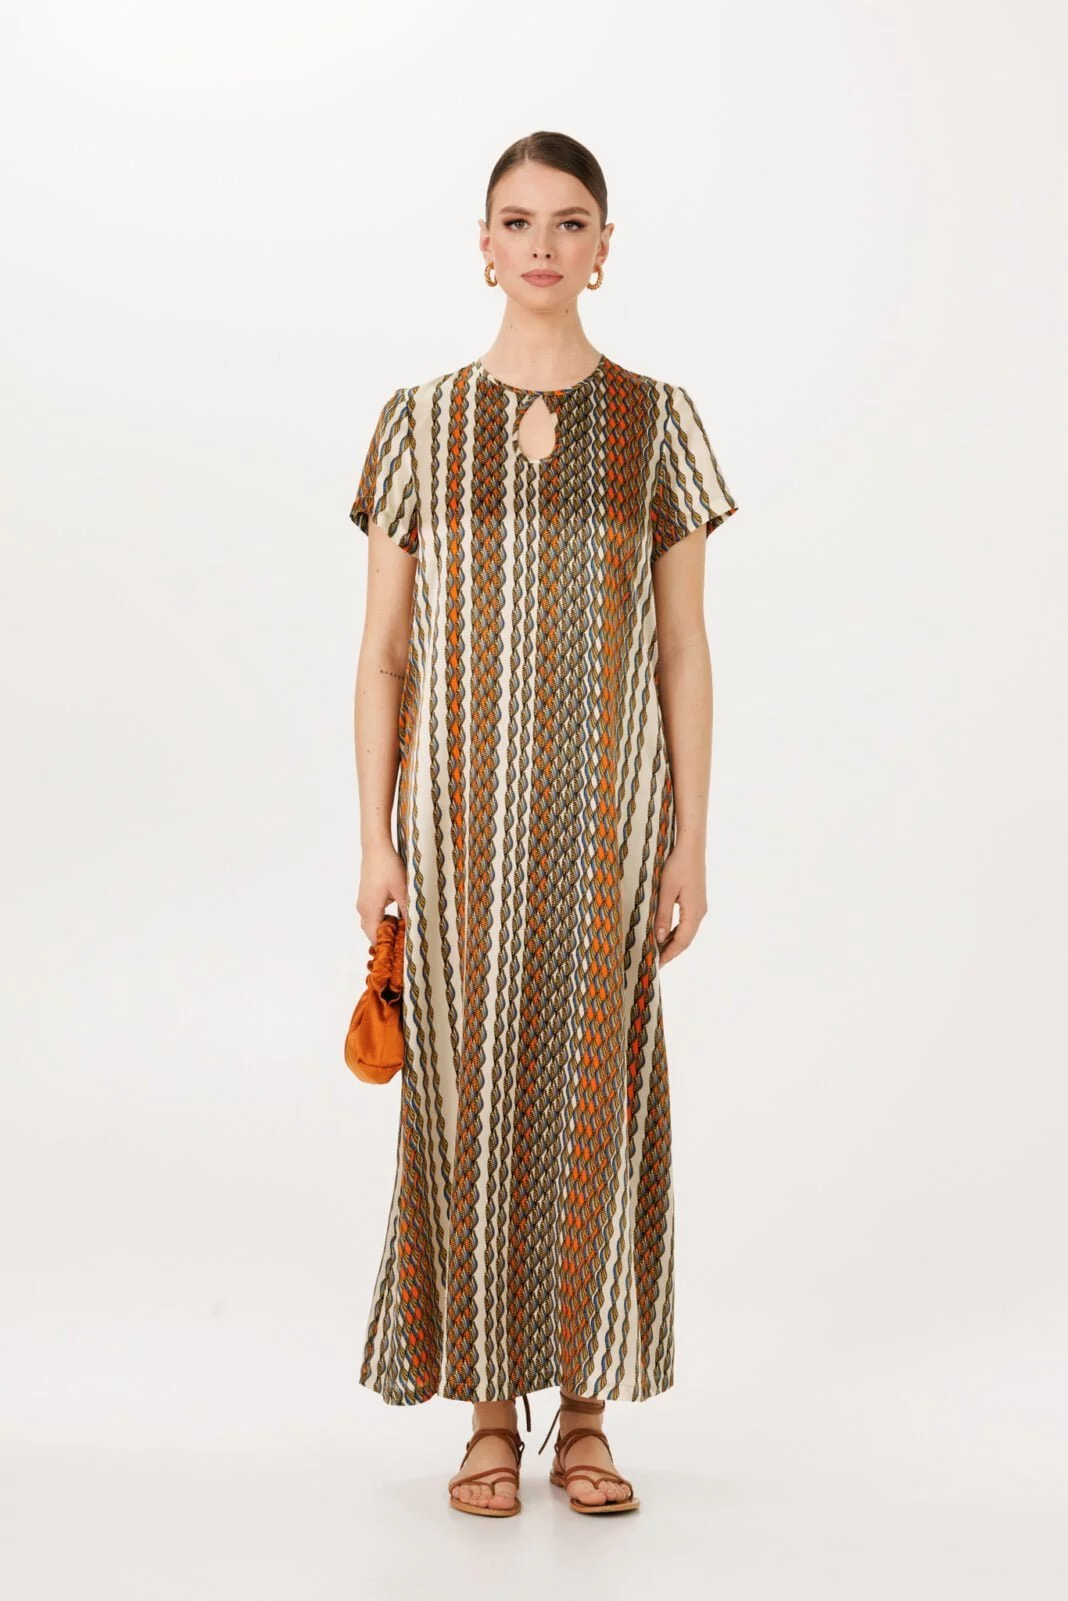 Maxi Length Luxurious Silk Dress - Striped Multicolor Print for Evening Wear and Wedding Guest Elegance